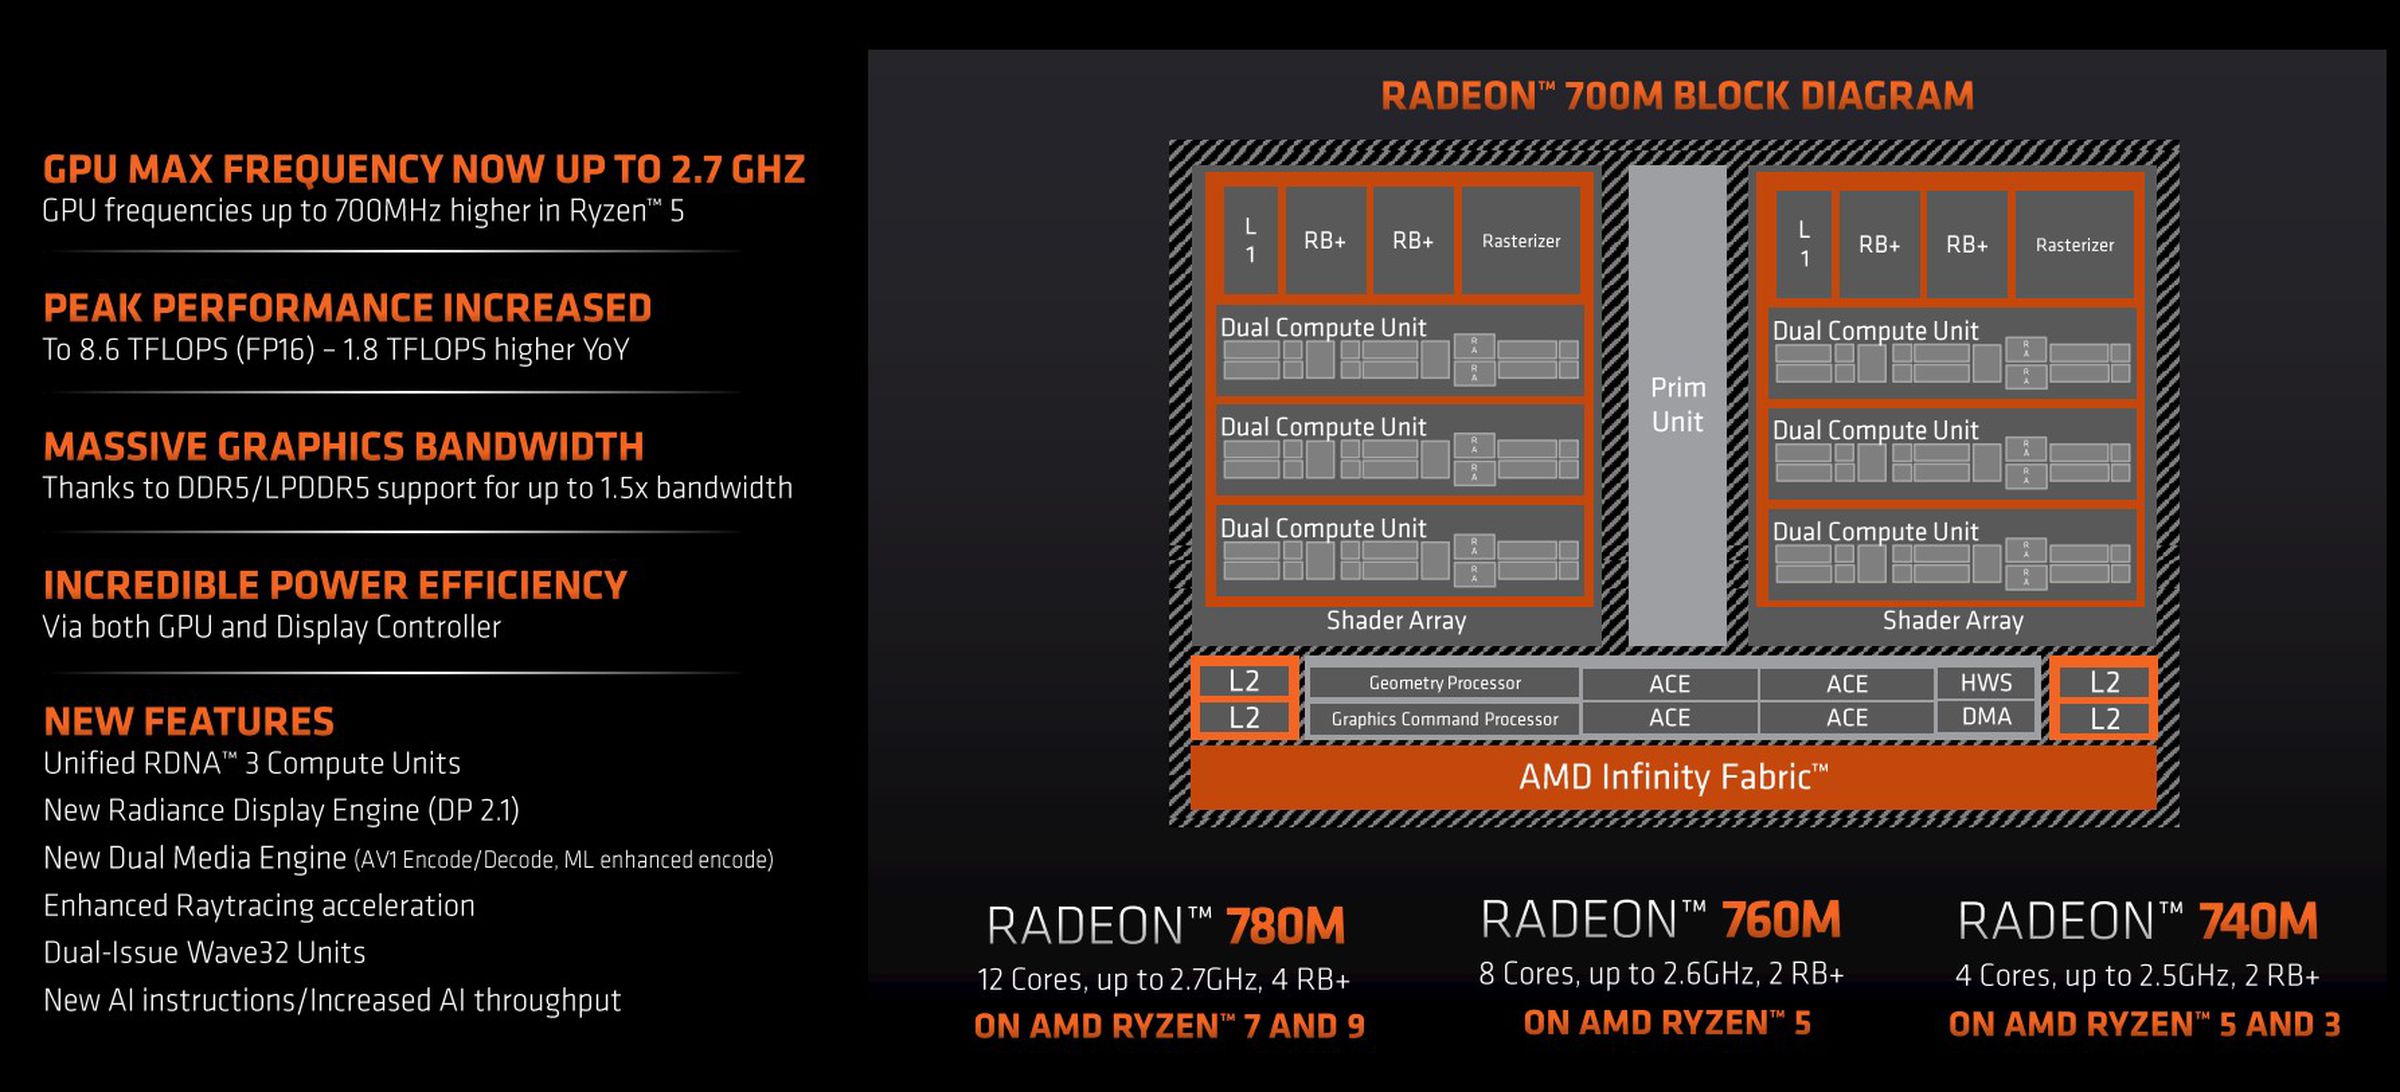 The Radeon 700M block diagram and features. 